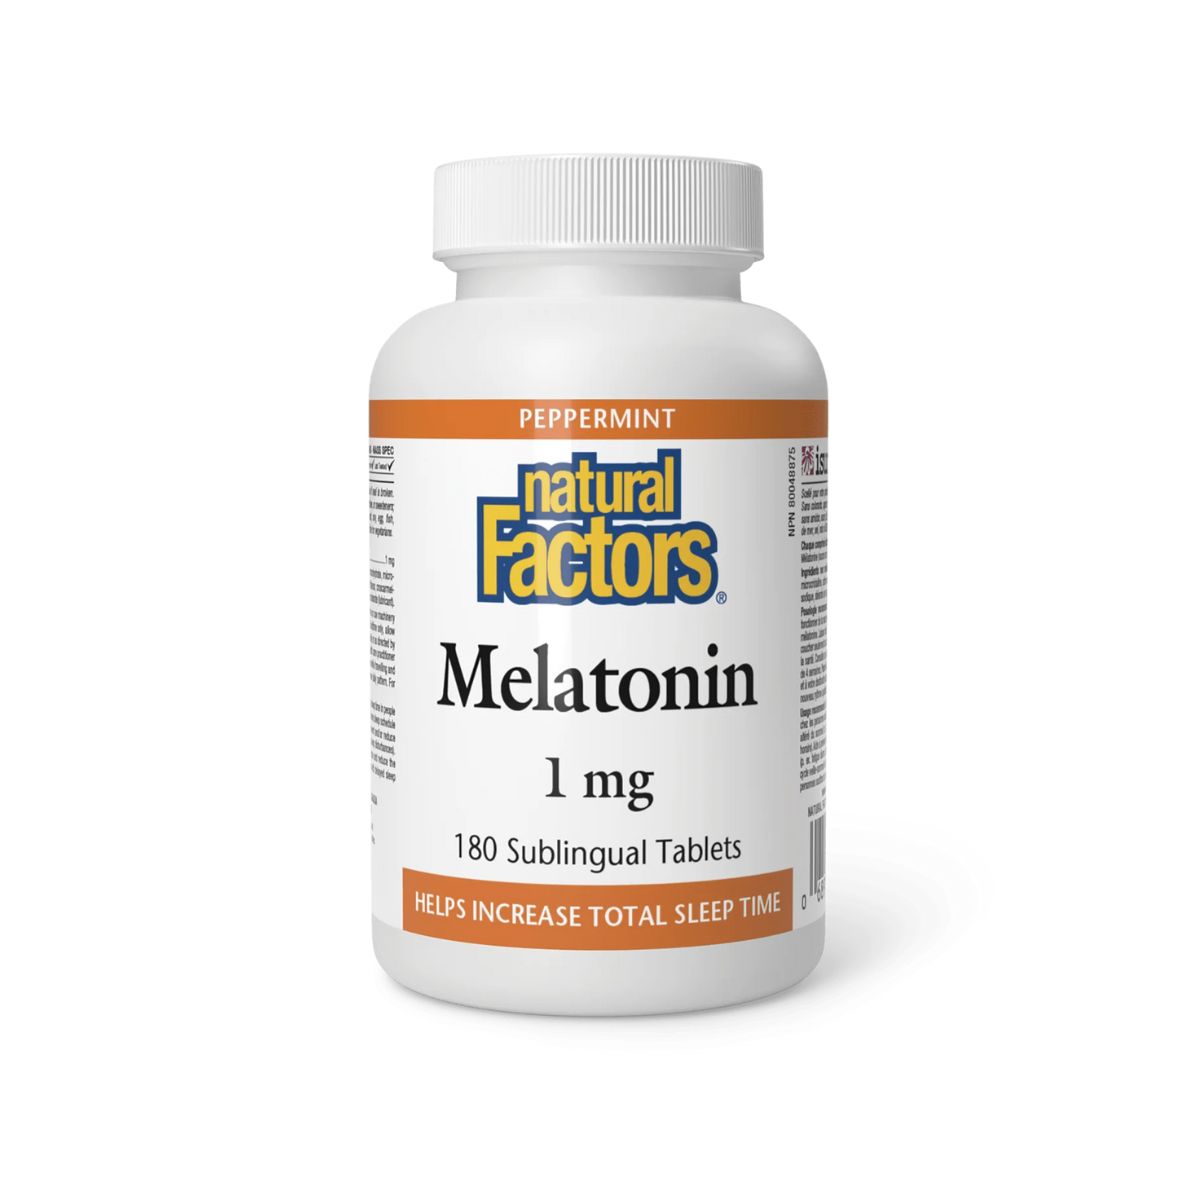 Natural Factors Melatonin 1mg Sublingual Tablets product image - Sleep aid supplement in a white and orange plastic bottle. 